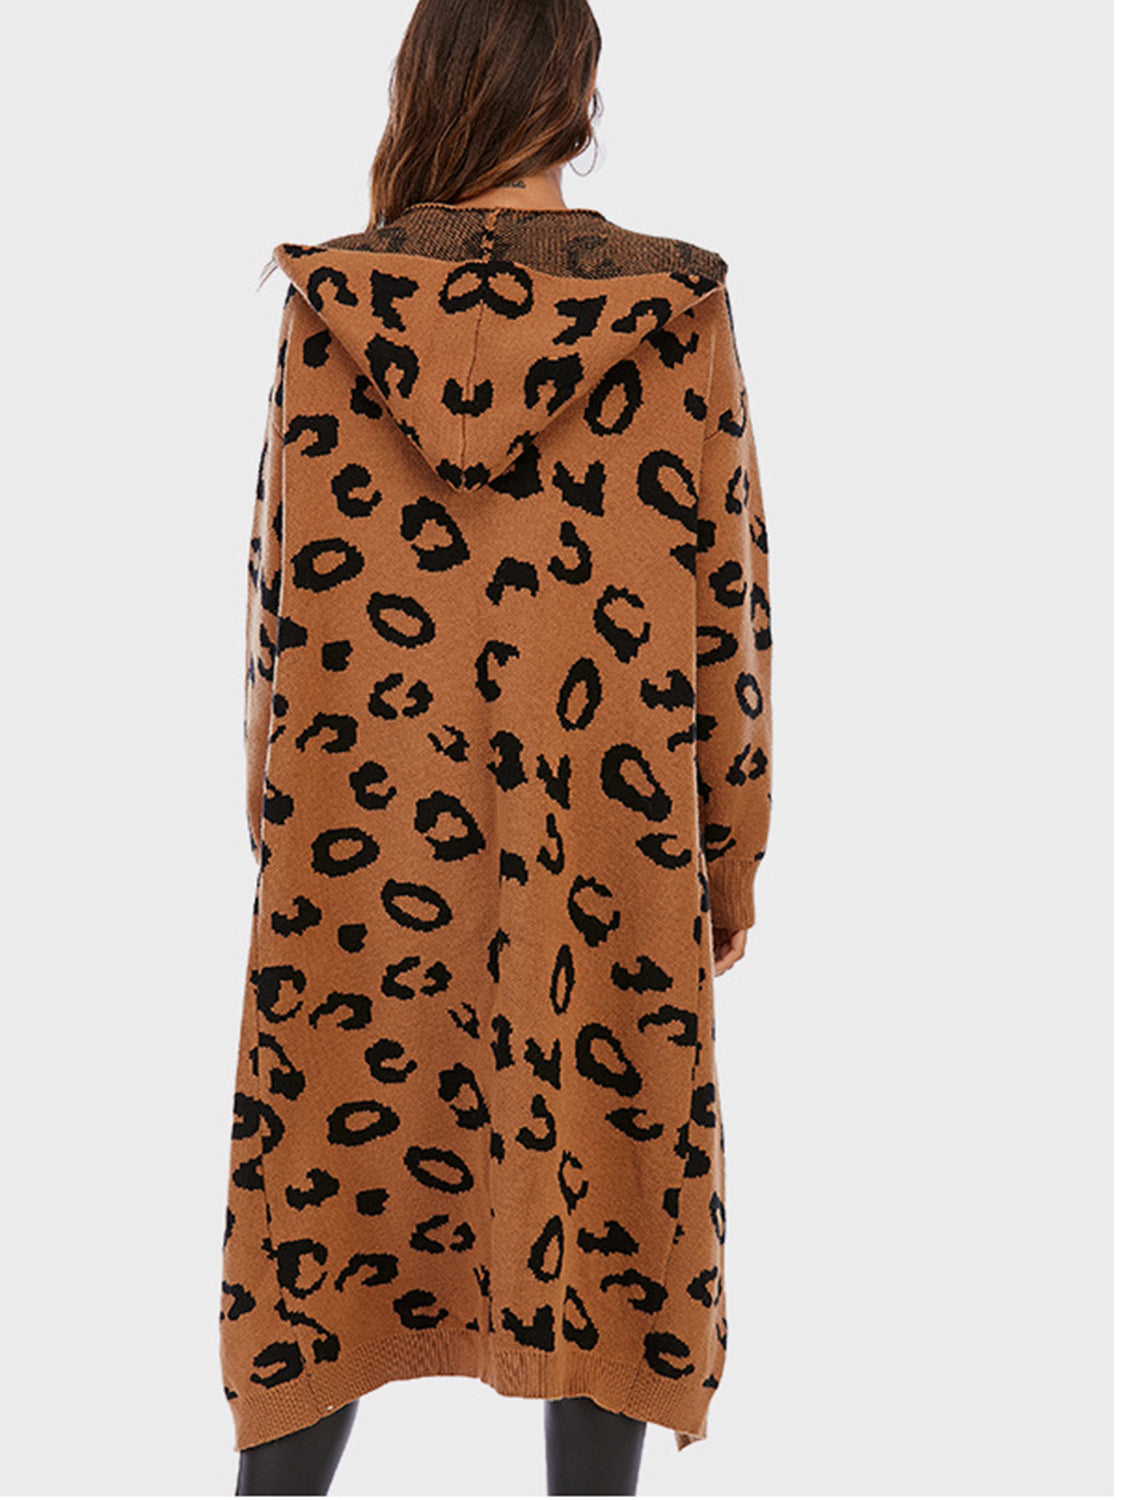 Leopard Hooded Cardigan with Pockets - Women’s Clothing & Accessories - Shirts & Tops - 9 - 2024